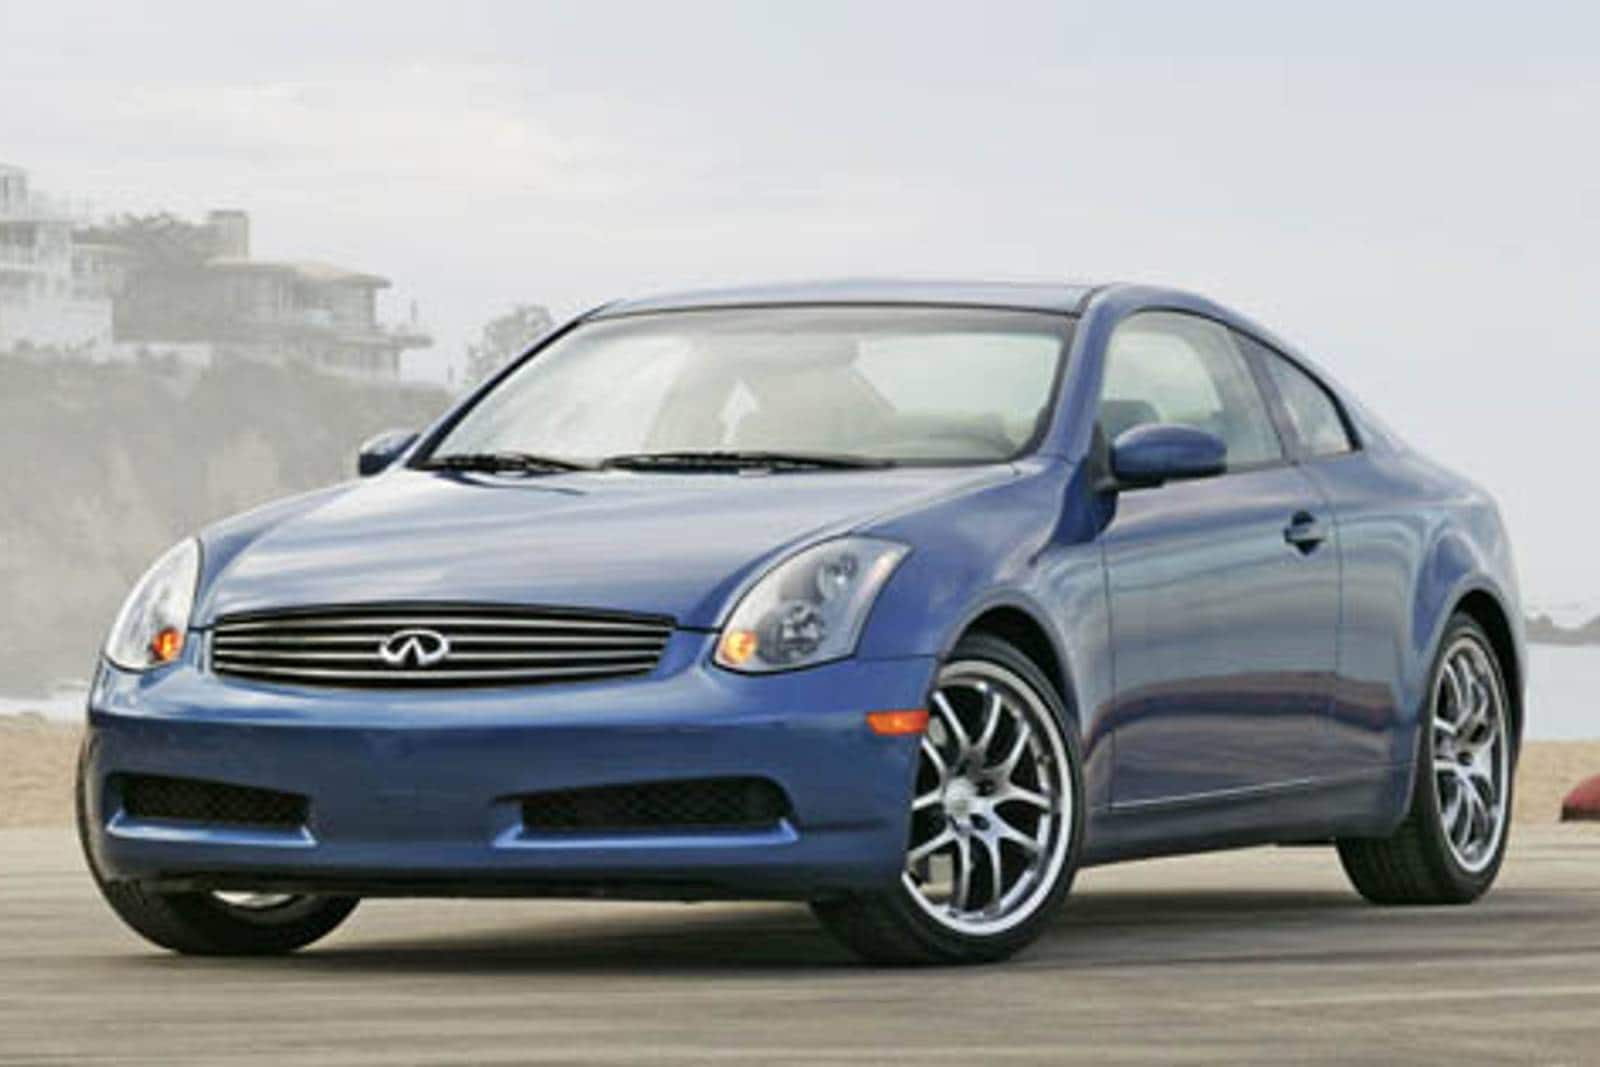 Used 2005 INFINITI G35 Coupe Review | Edmunds